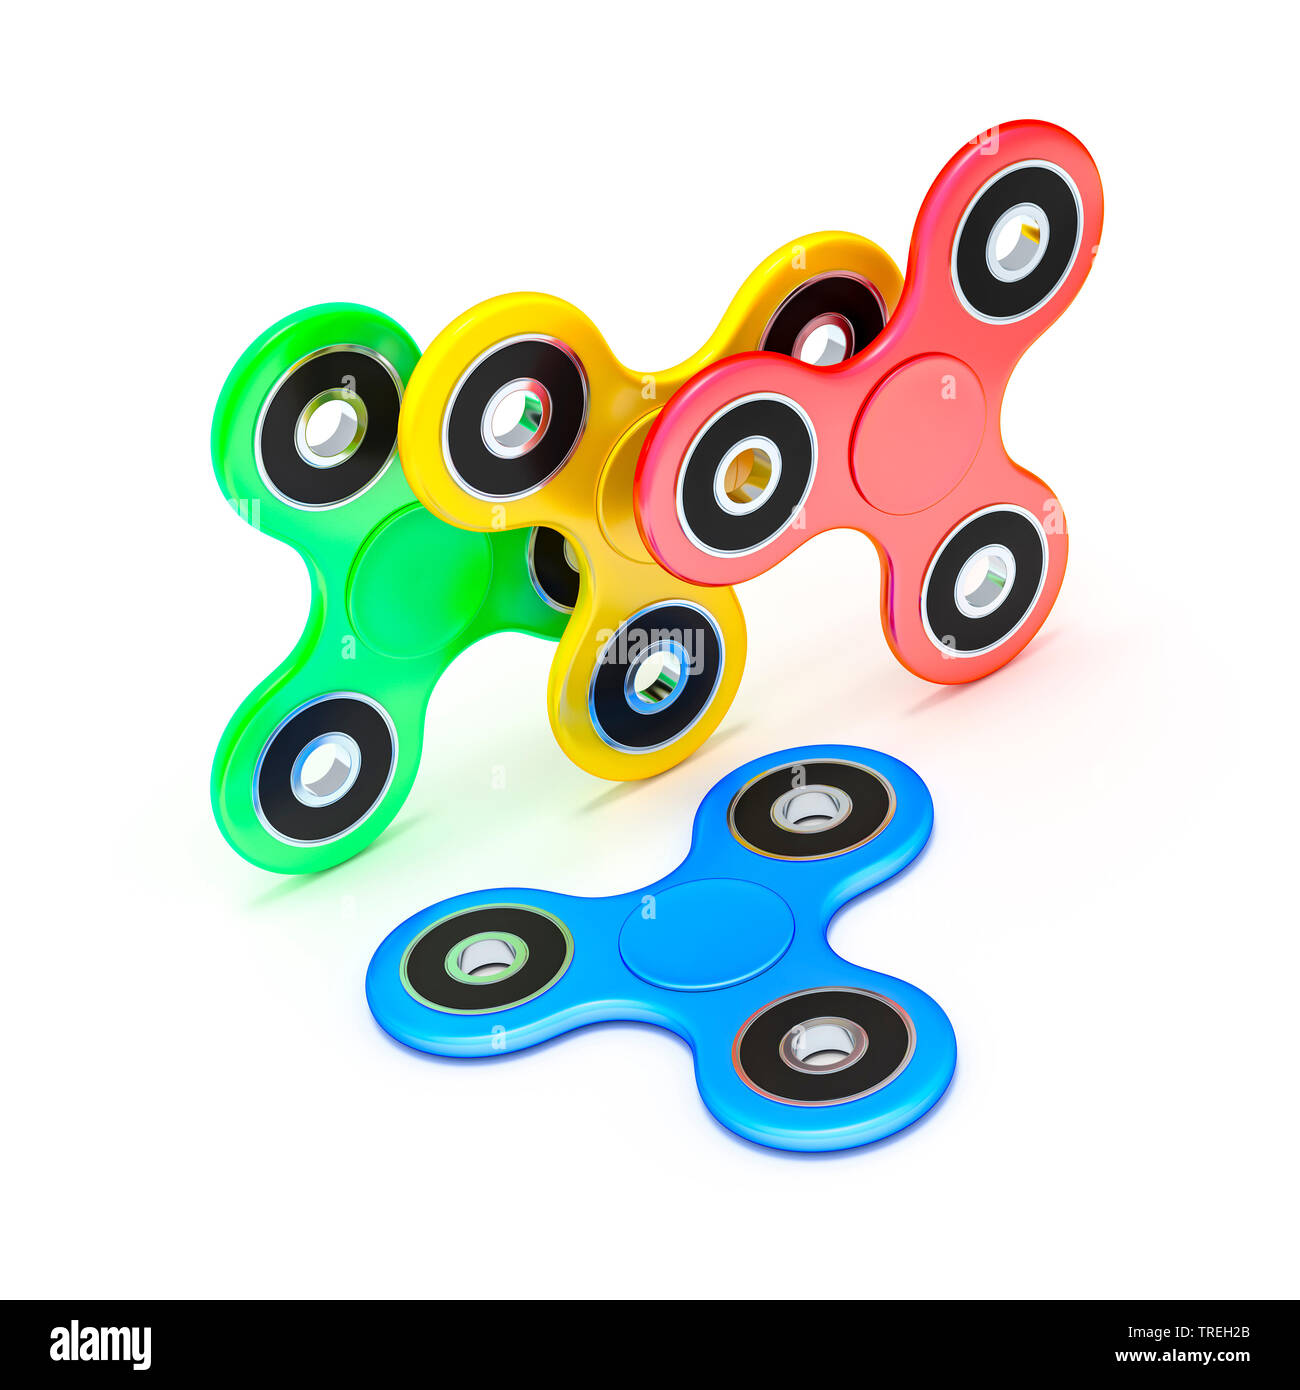 3D computer graphic, four fidget spinner in different colors Stock Photo